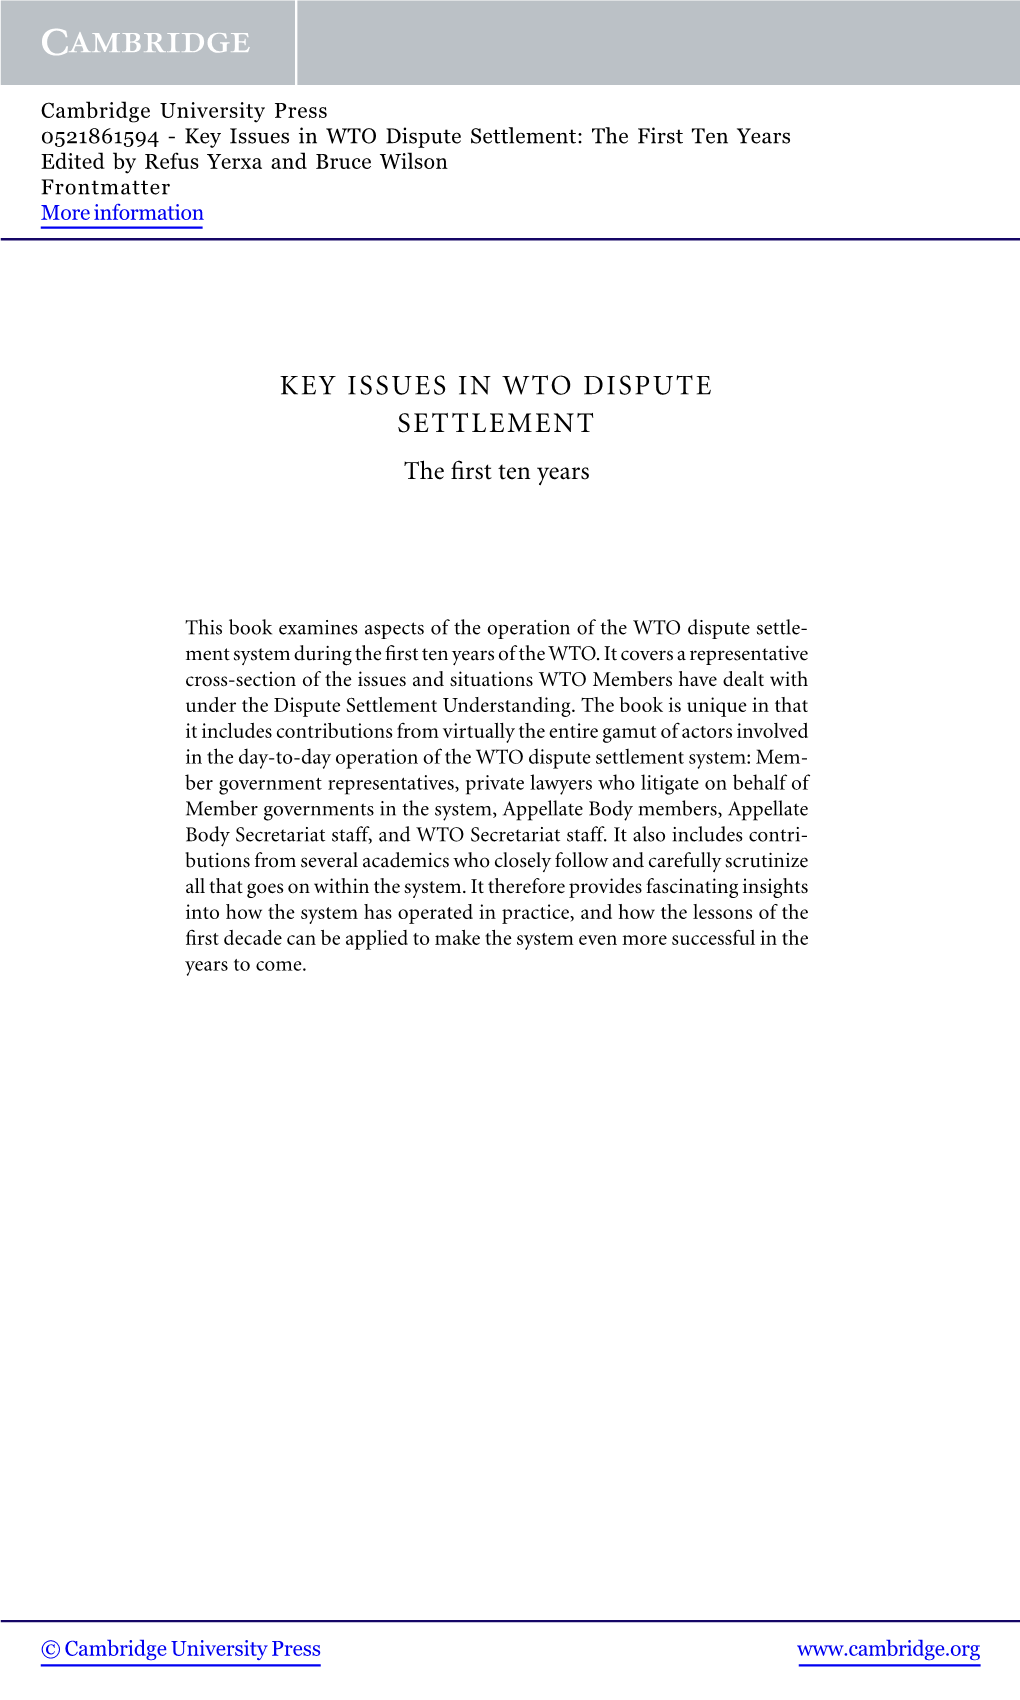 Key Issues in WTO Dispute Settlement: the First Ten Years Edited by Refus Yerxa and Bruce Wilson Frontmatter More Information